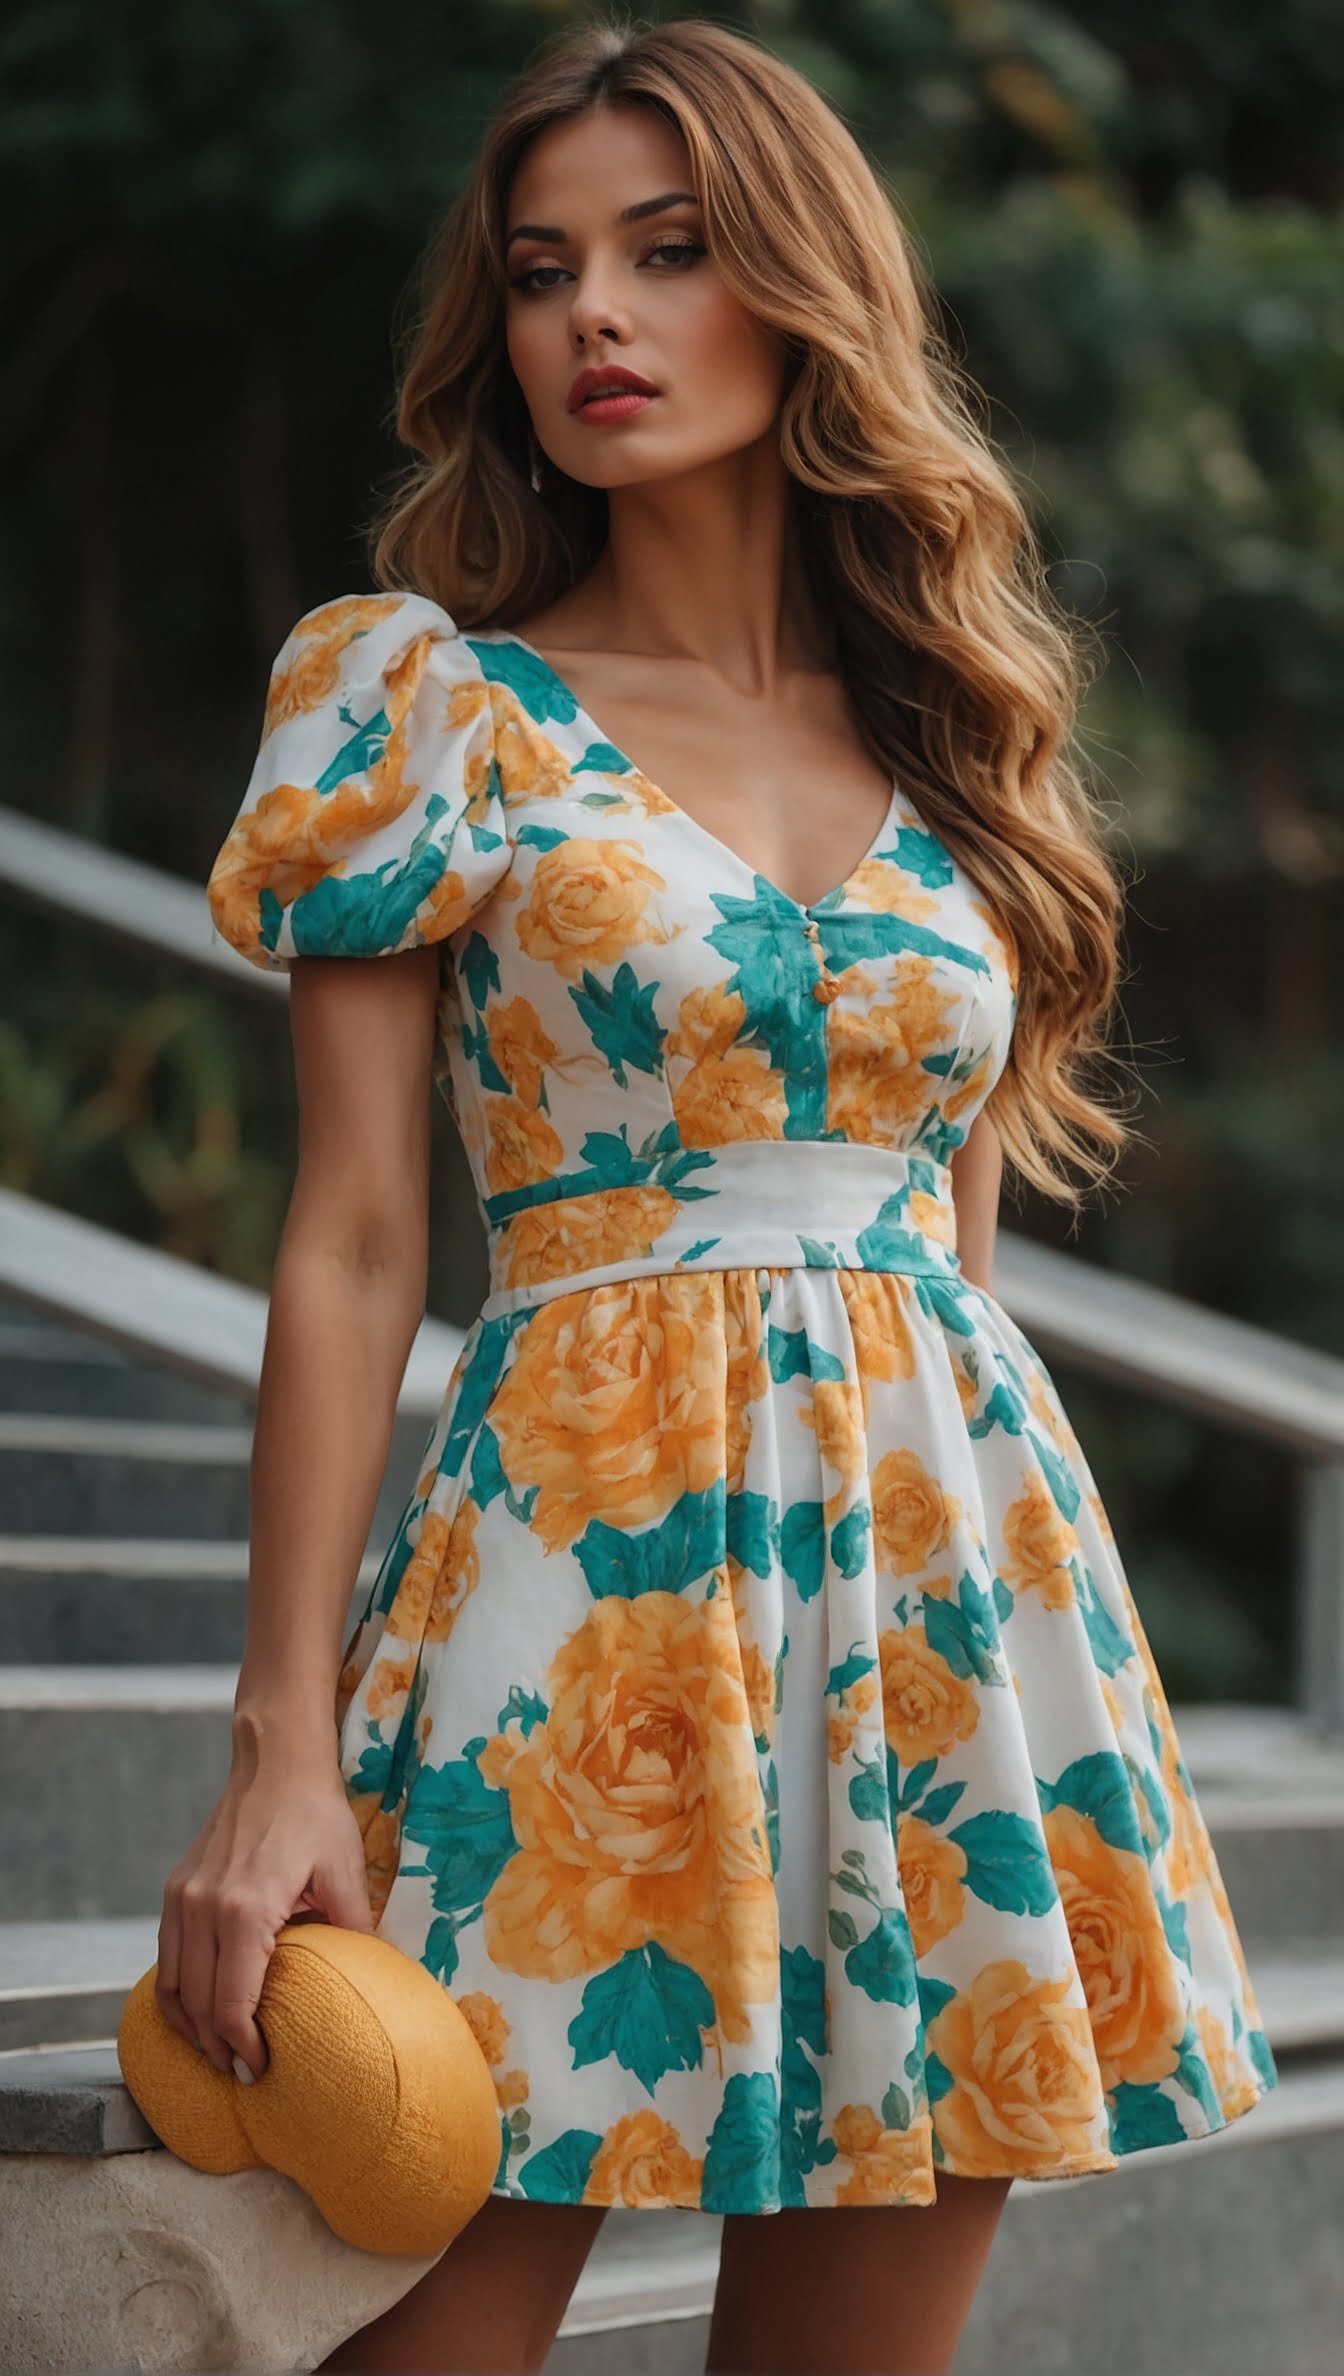 Chic Garden Party - Vibrant Floral Mini Dress with Puff Sleeves